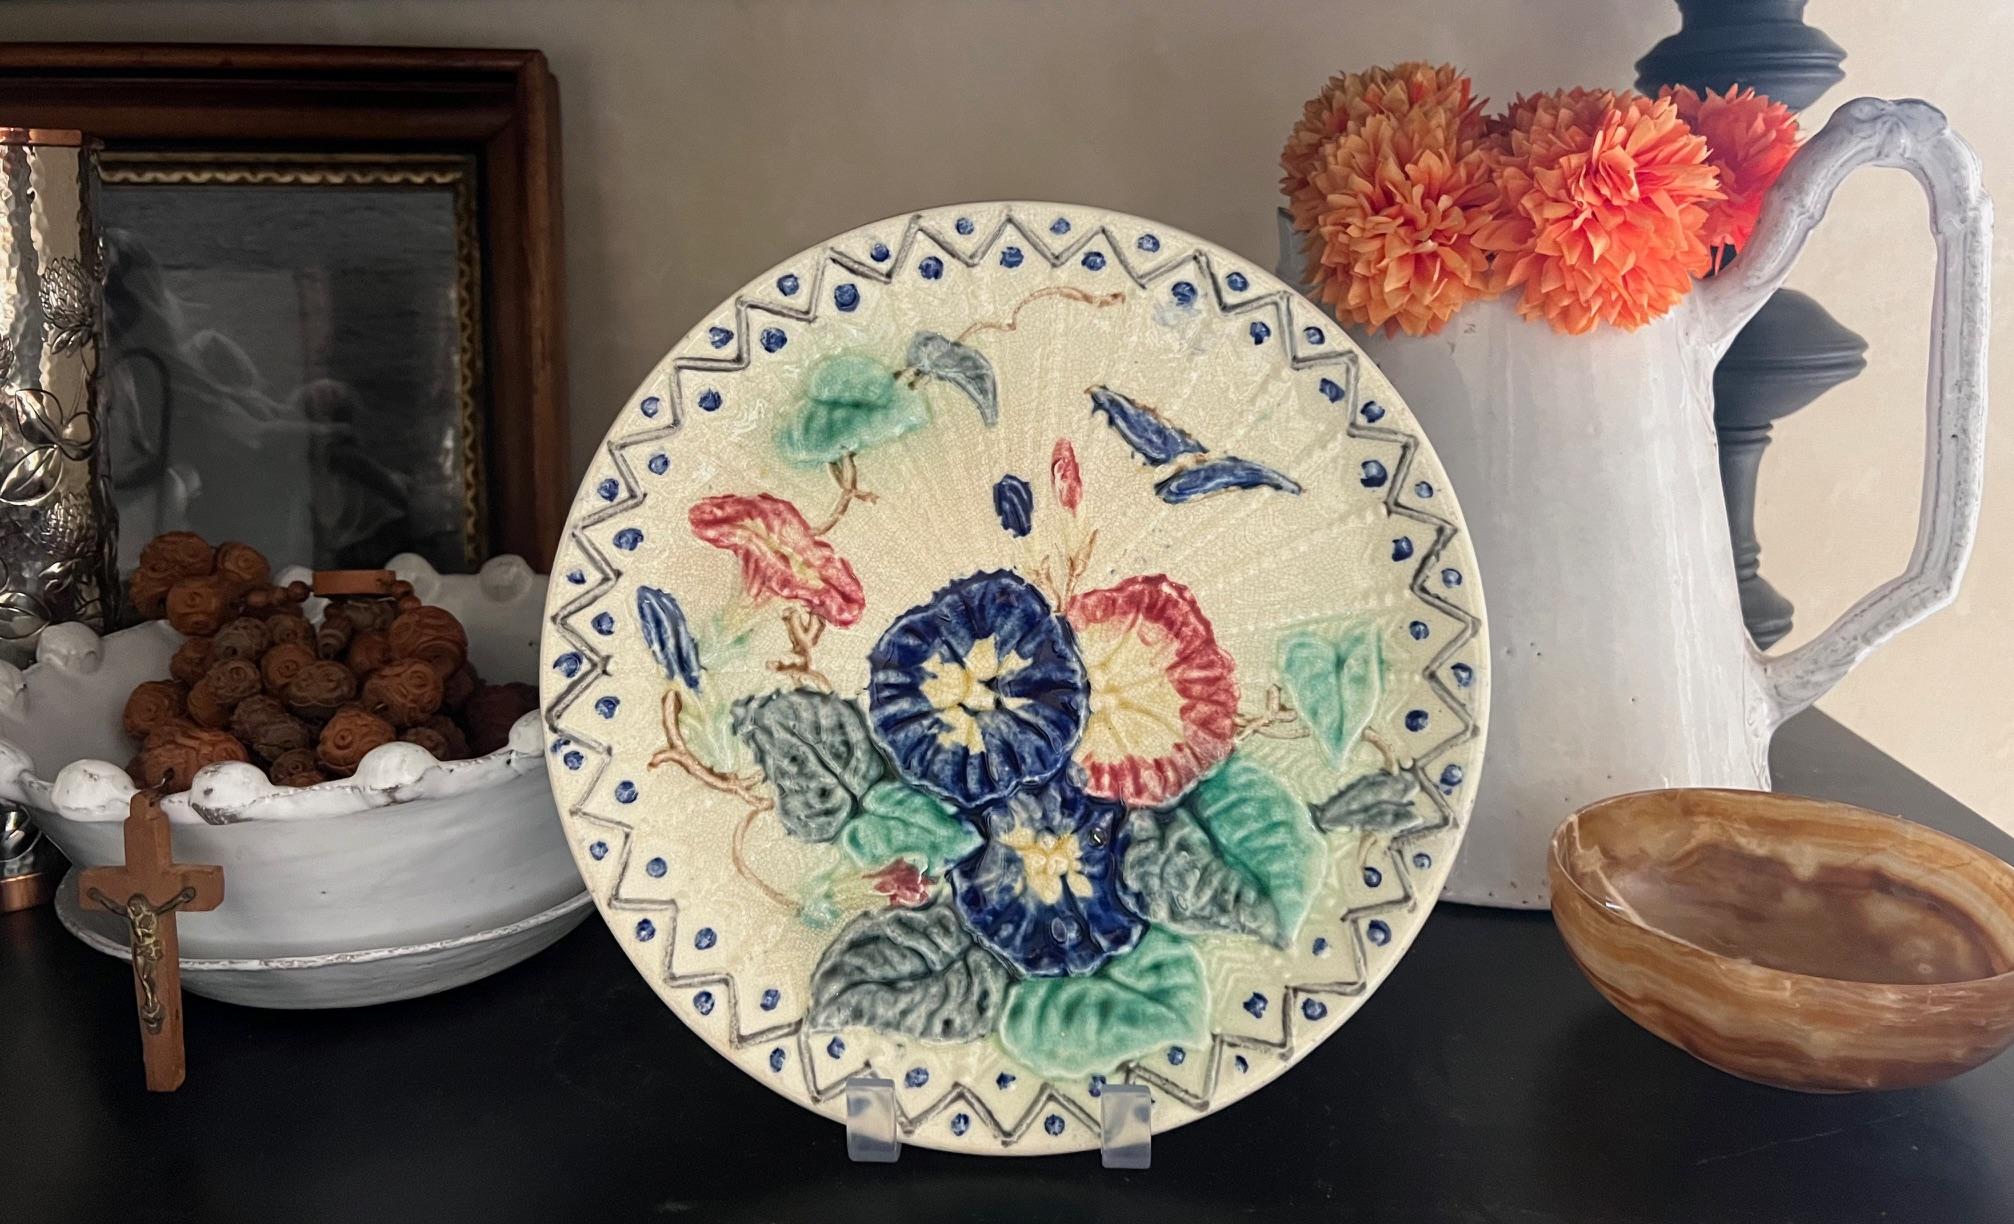 Antique plate made in Belgium in the late 19th century by Wasmuel. The plate is called the 